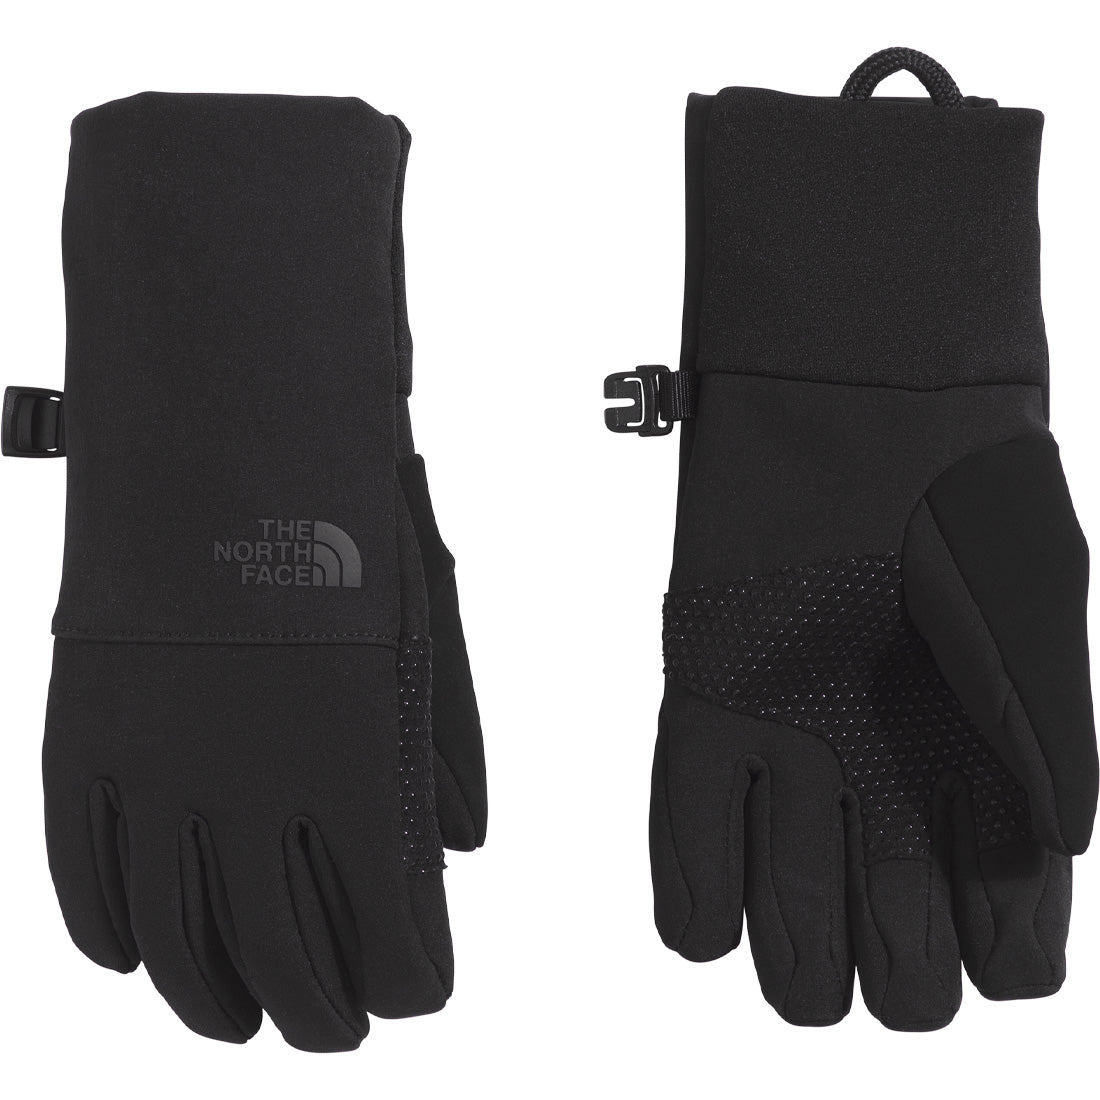 The North Face Apex Insulated Etip Glove - Kids